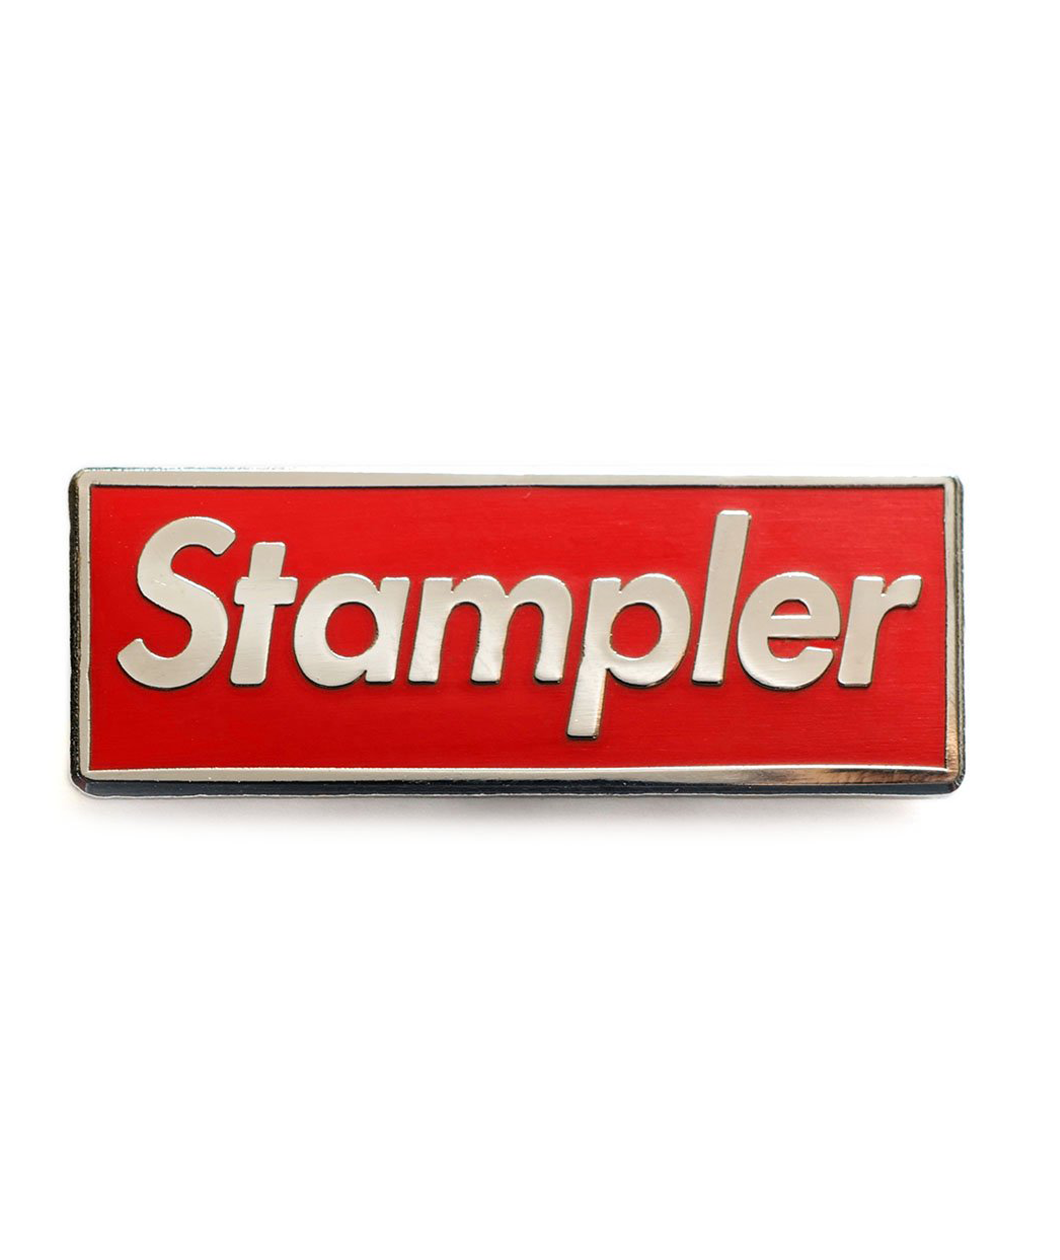 Silver plated rectangular enamel pin with red enamel and the word Stampler in silver in the center.